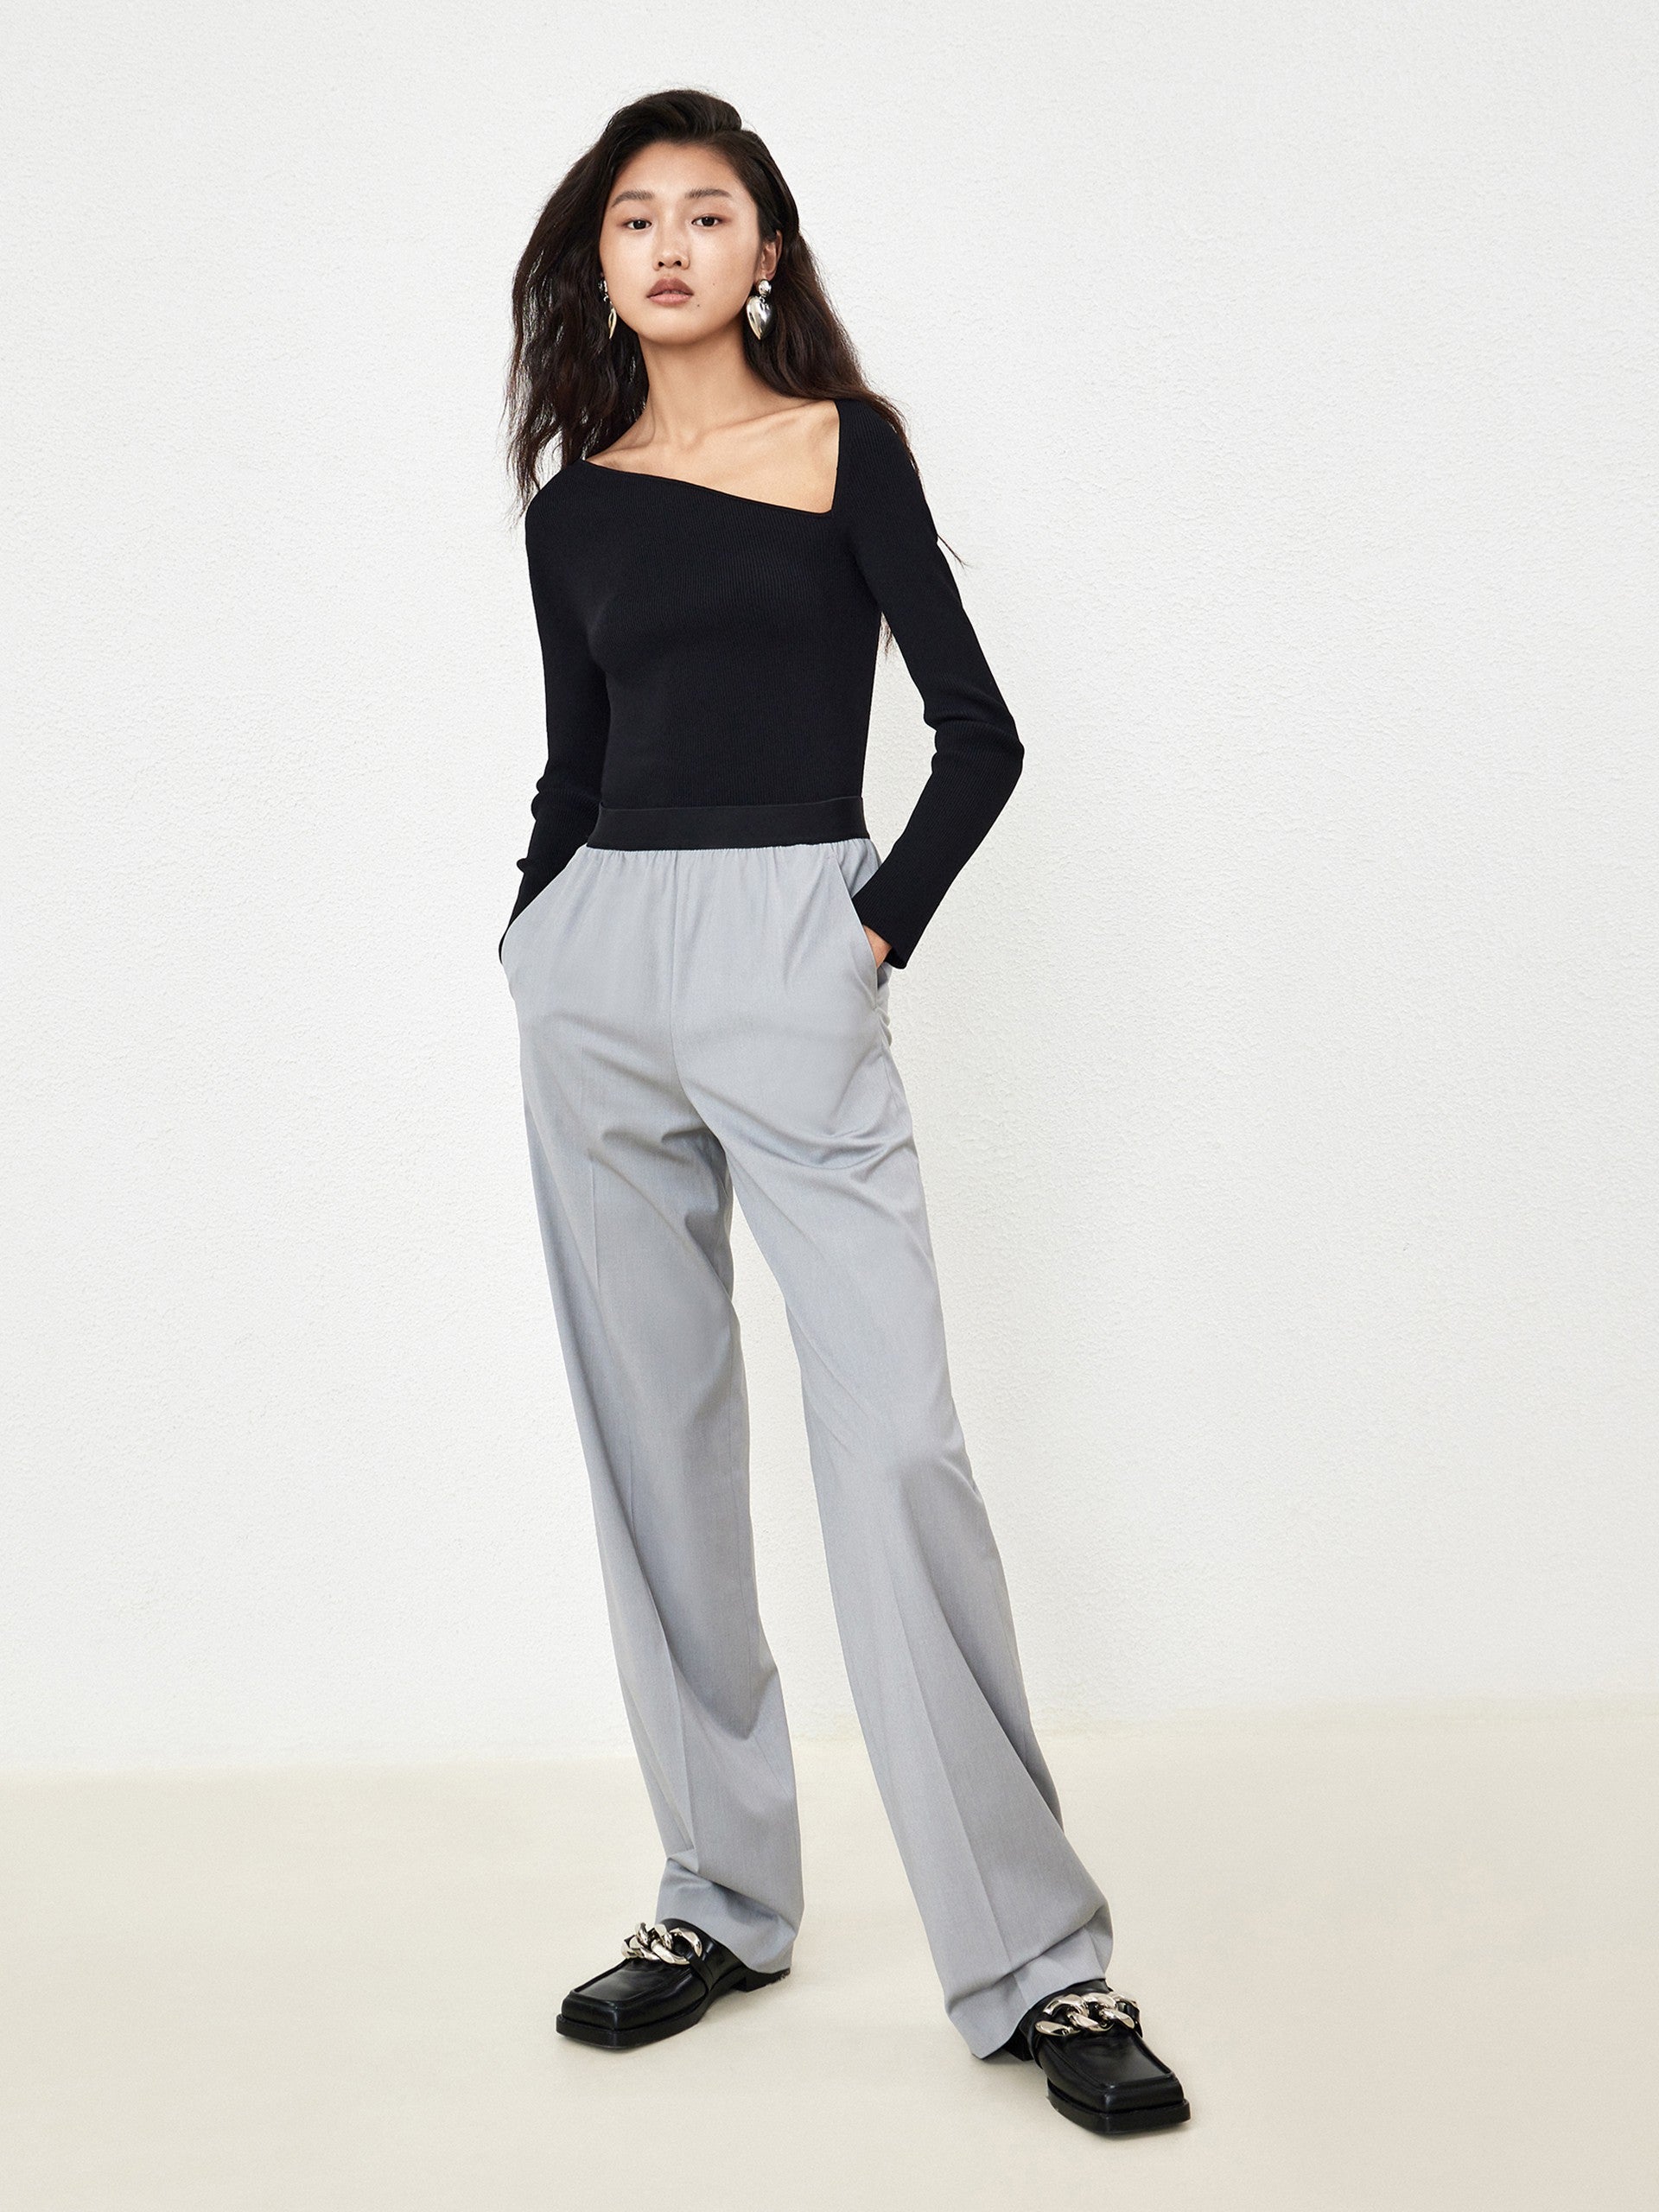 Loose Sports Pants for Women